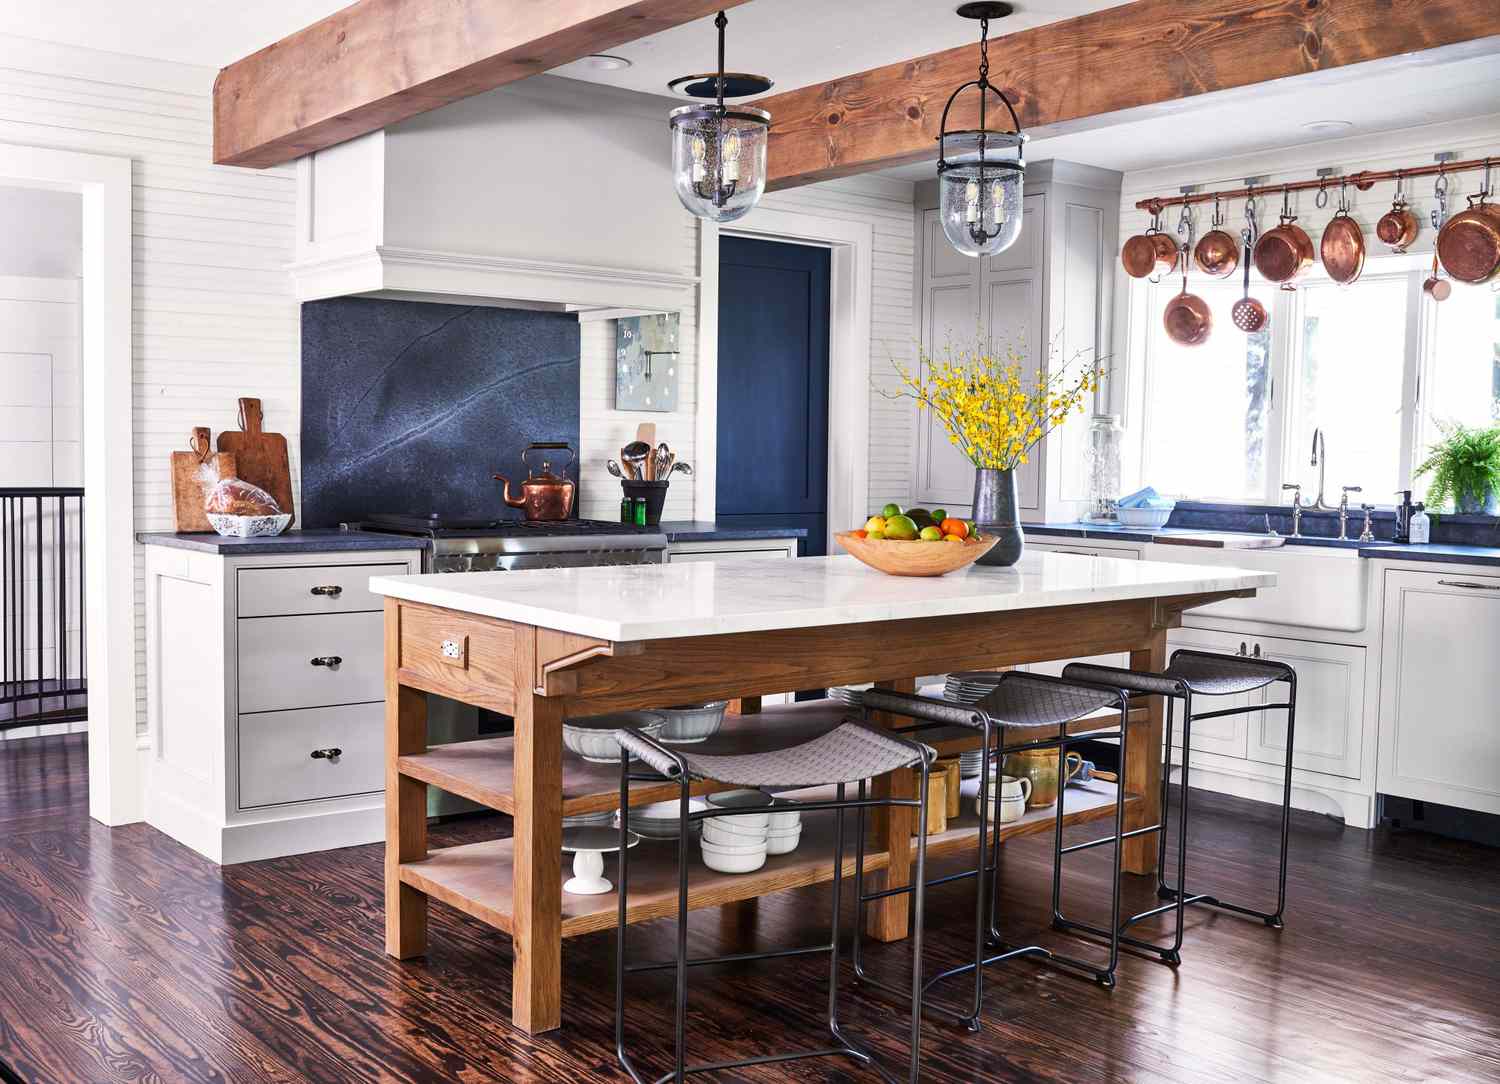 Where Can I Buy Authentic Farmhouse Kitchen Accessories? 